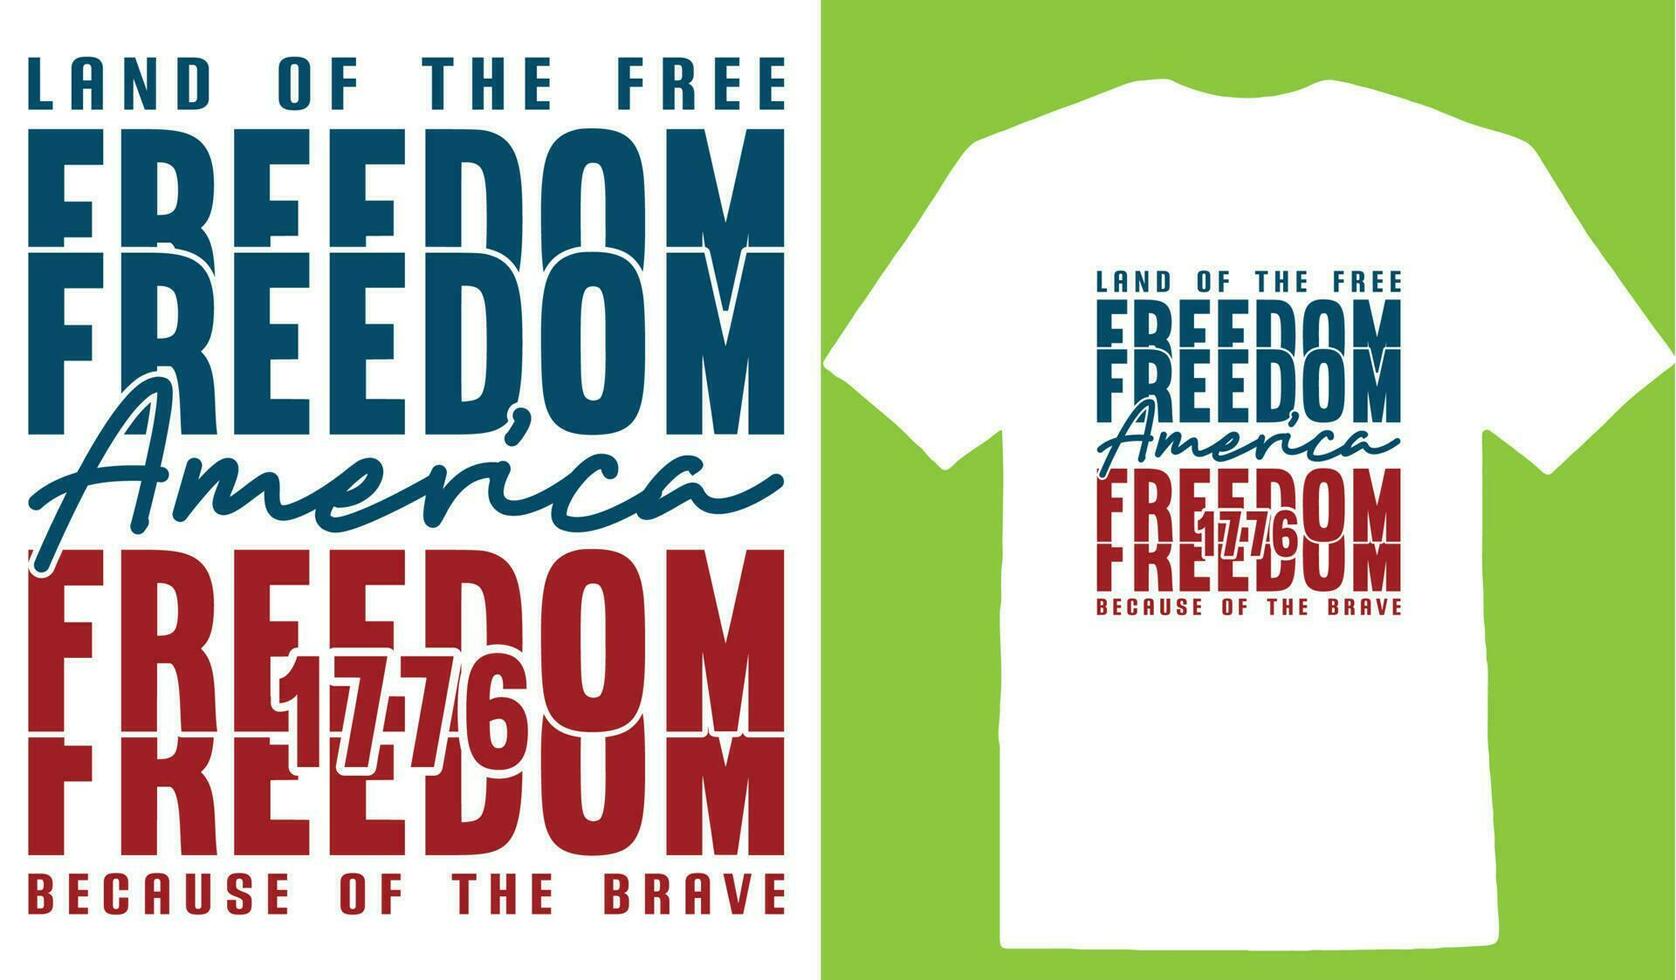 Land Of The Free Freedom America 1776 Because Of The Brave T-shirt vector